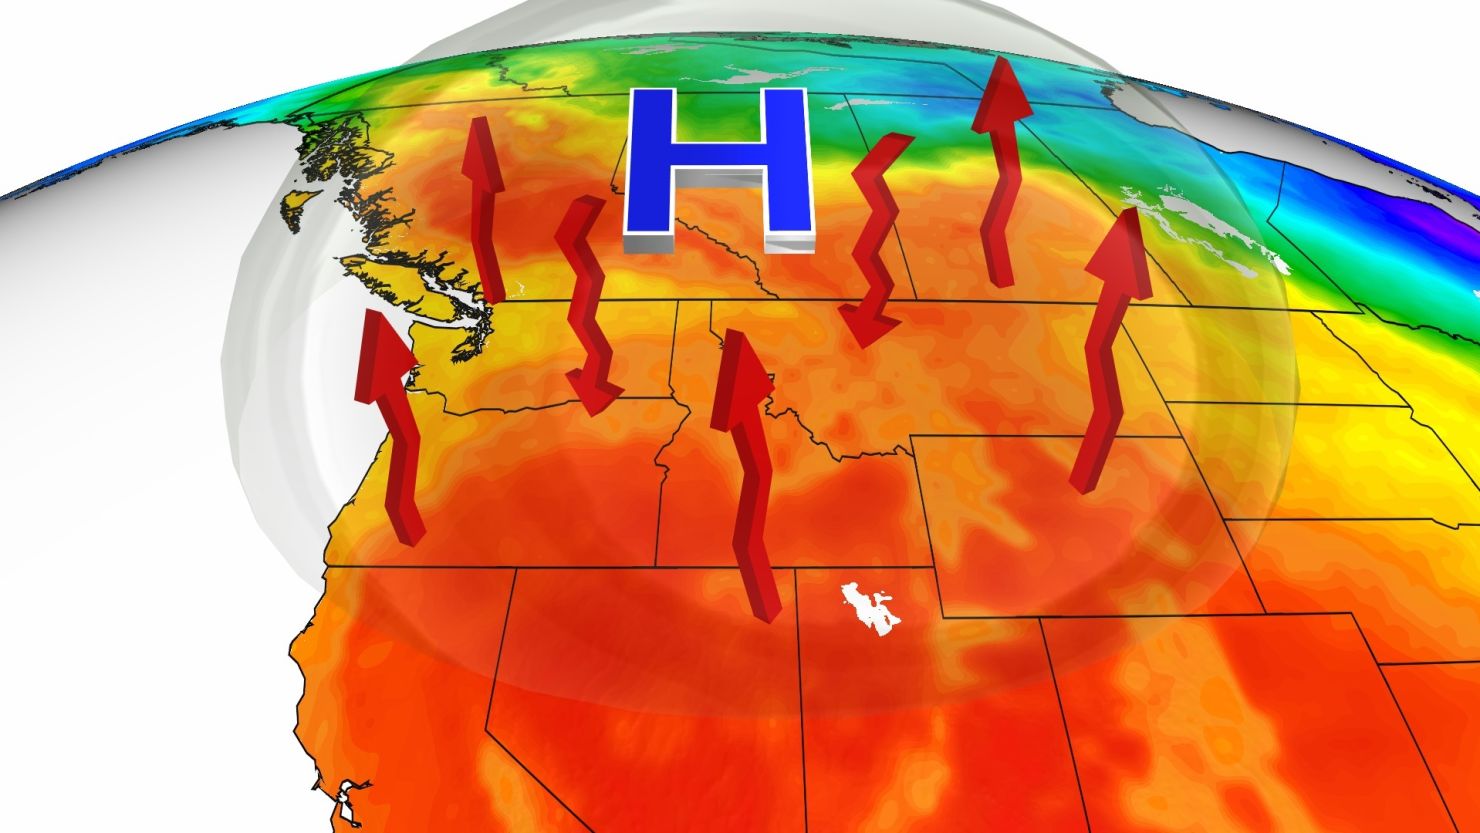 Over 20 million people are under heat alerts in the northwestern US and  western Canada, as summer-like heat increases the risk of wildfires